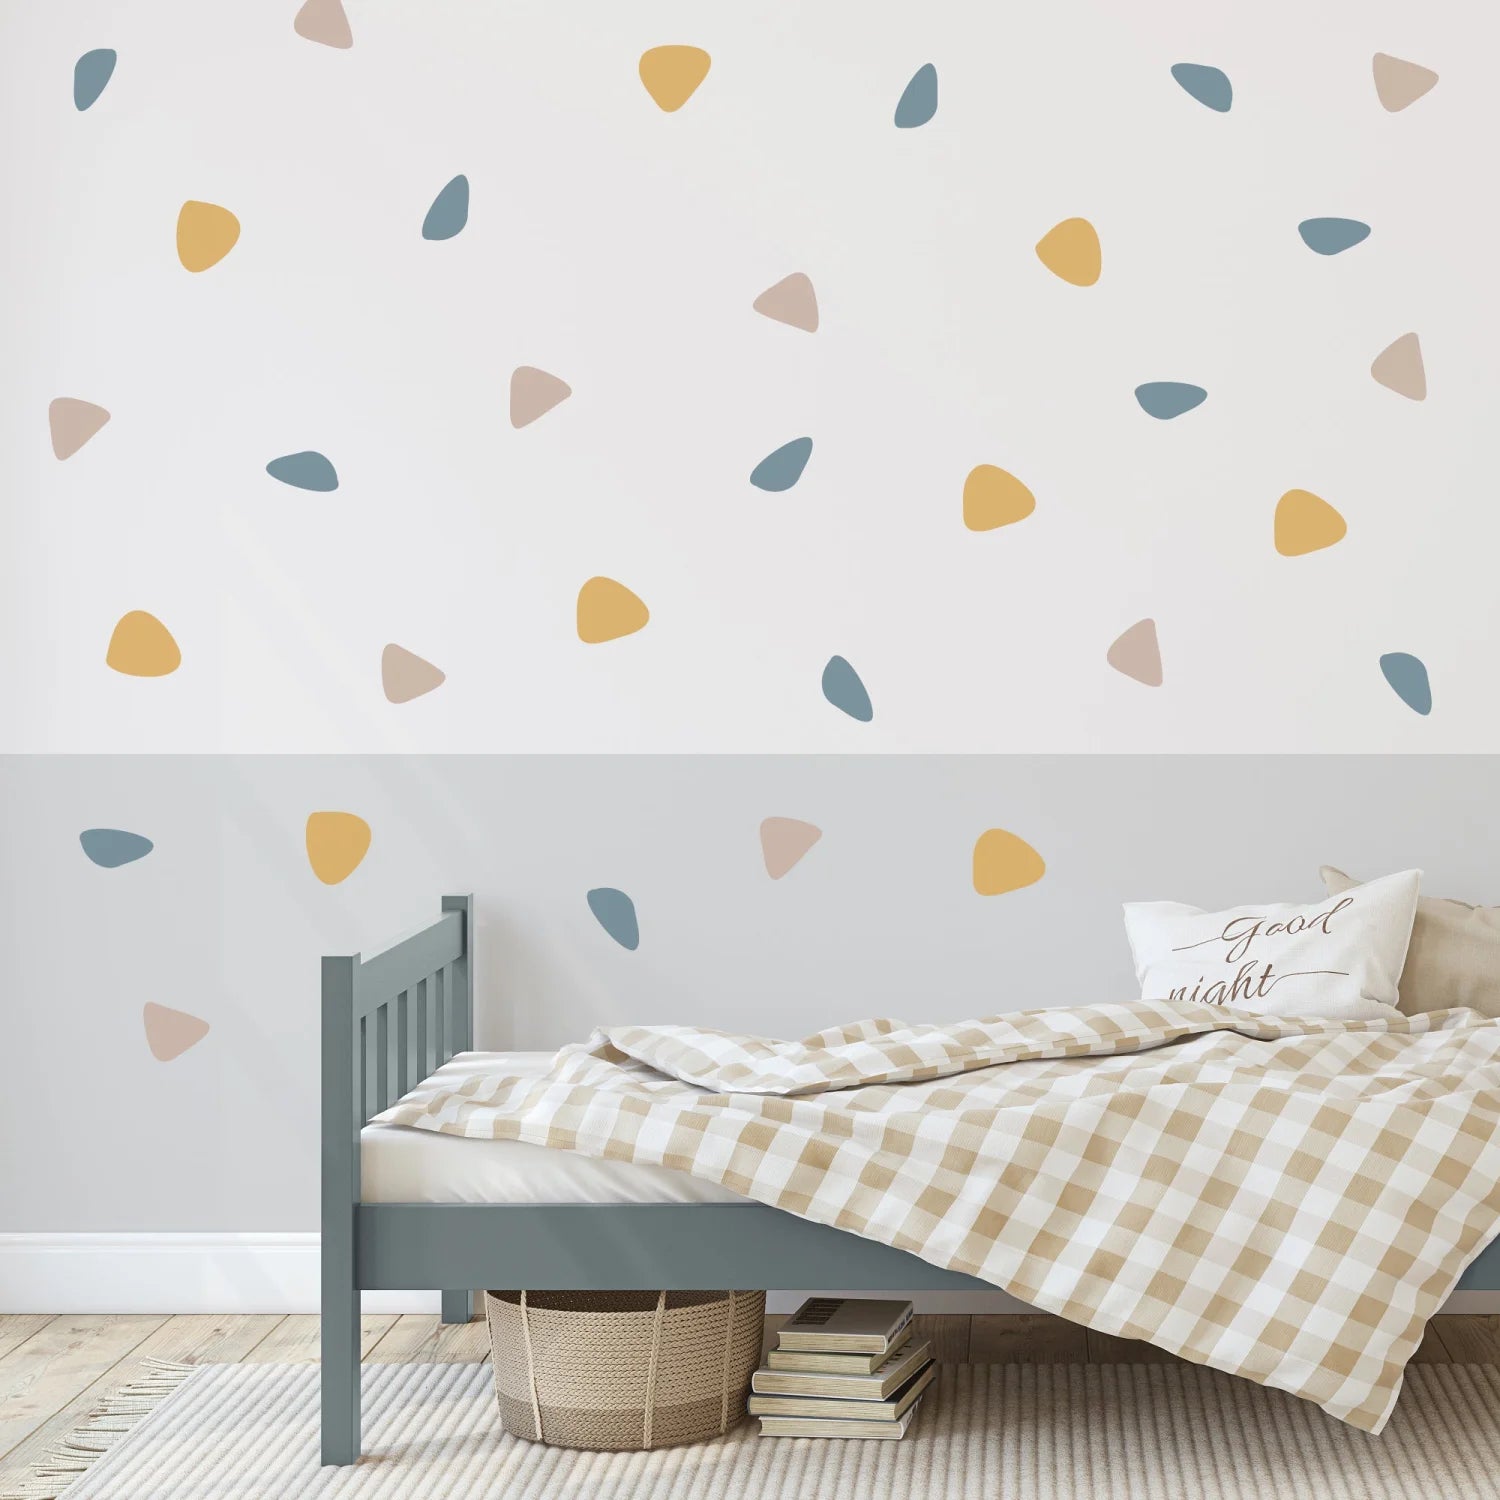 Seaside Triangles Wall Decal - Decals Abstract Shapes